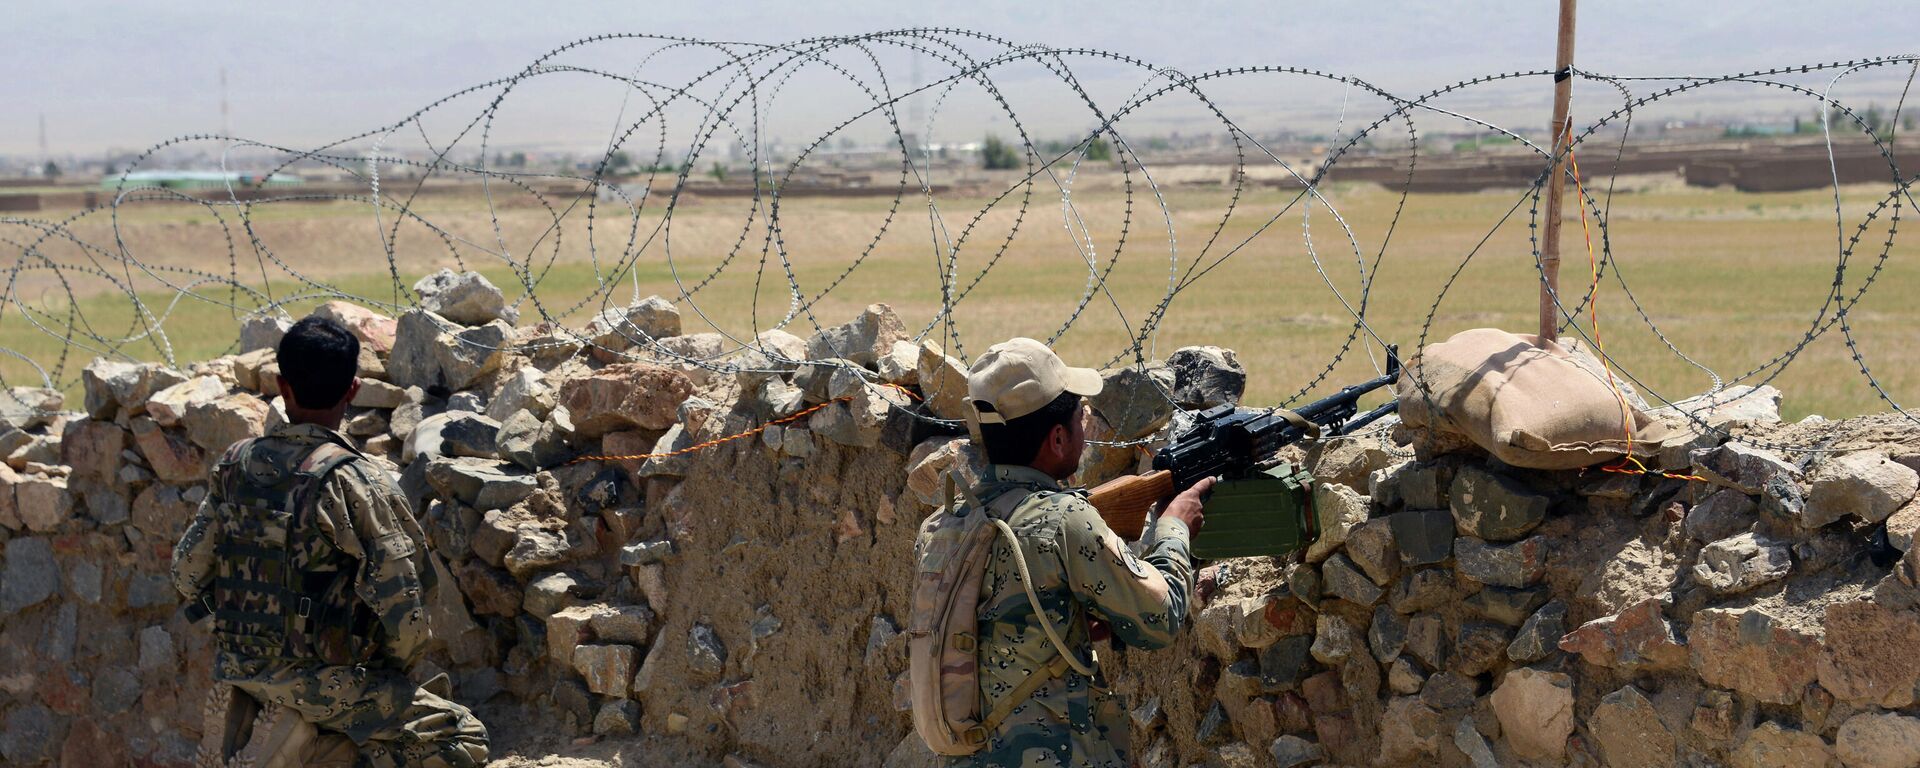 Afghan Border Police personnel keep watch during an ongoing battle between Pakistani and Afghan Border forces near the Durand line at Spin Boldak, in southern Kandahar province on May 5, 2017 - Sputnik International, 1920, 12.01.2022